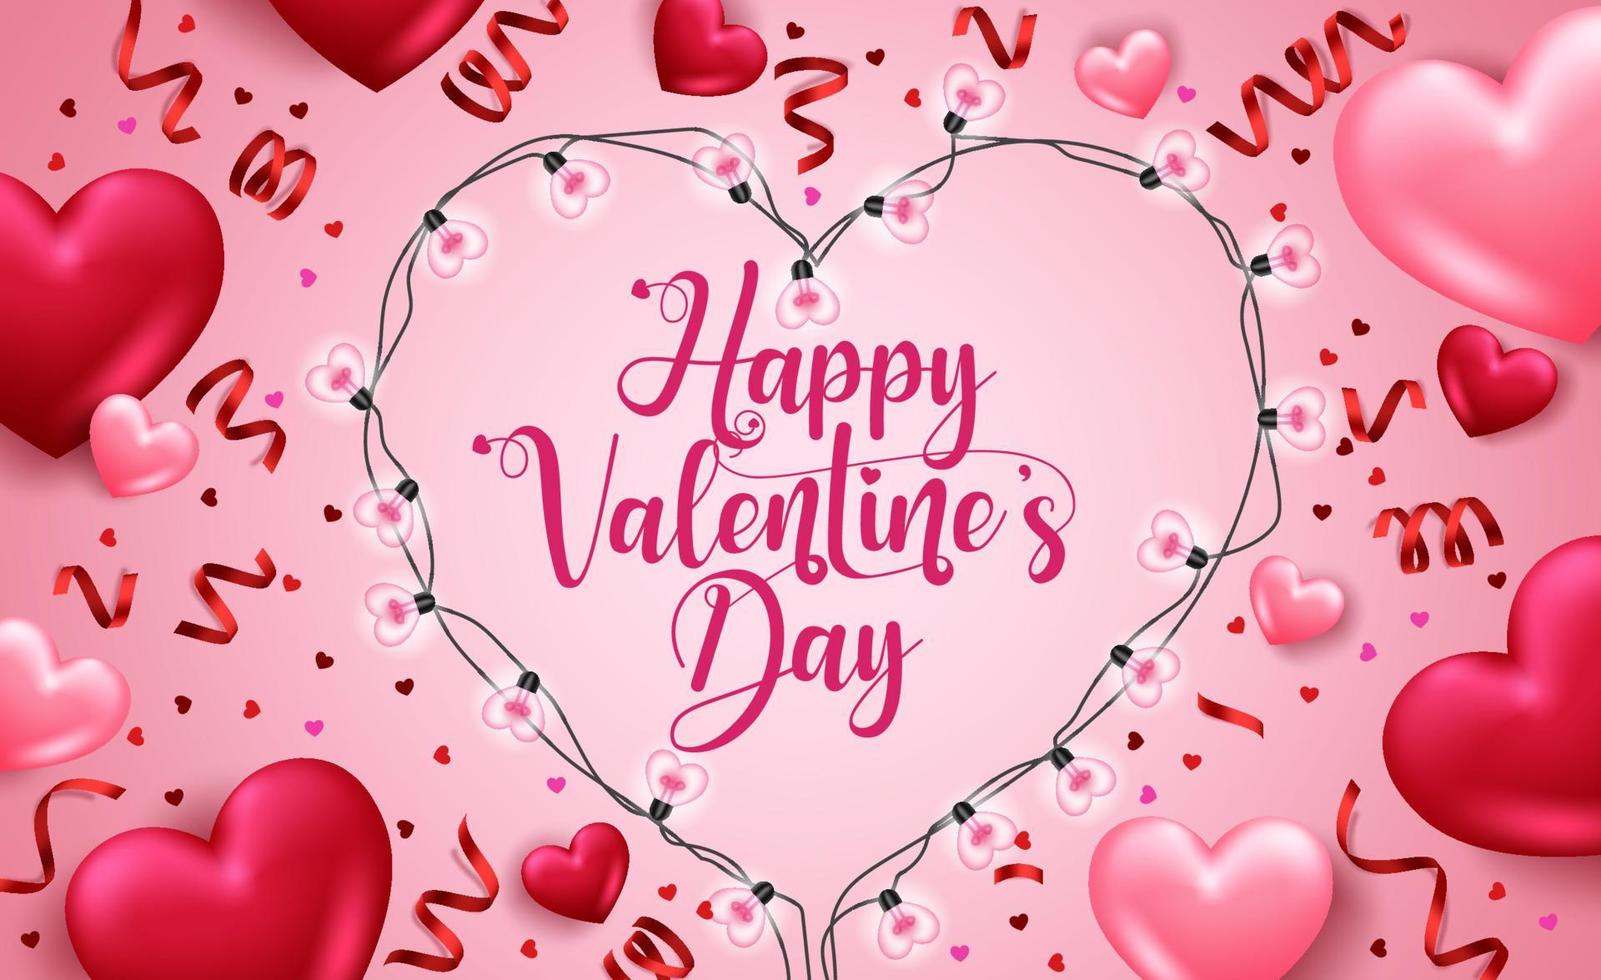 Valentine's day vector background design. Happy valentine's day text with 3d hearts, heart shape light and confetti decoration elements for valentine card design. Vector illustration